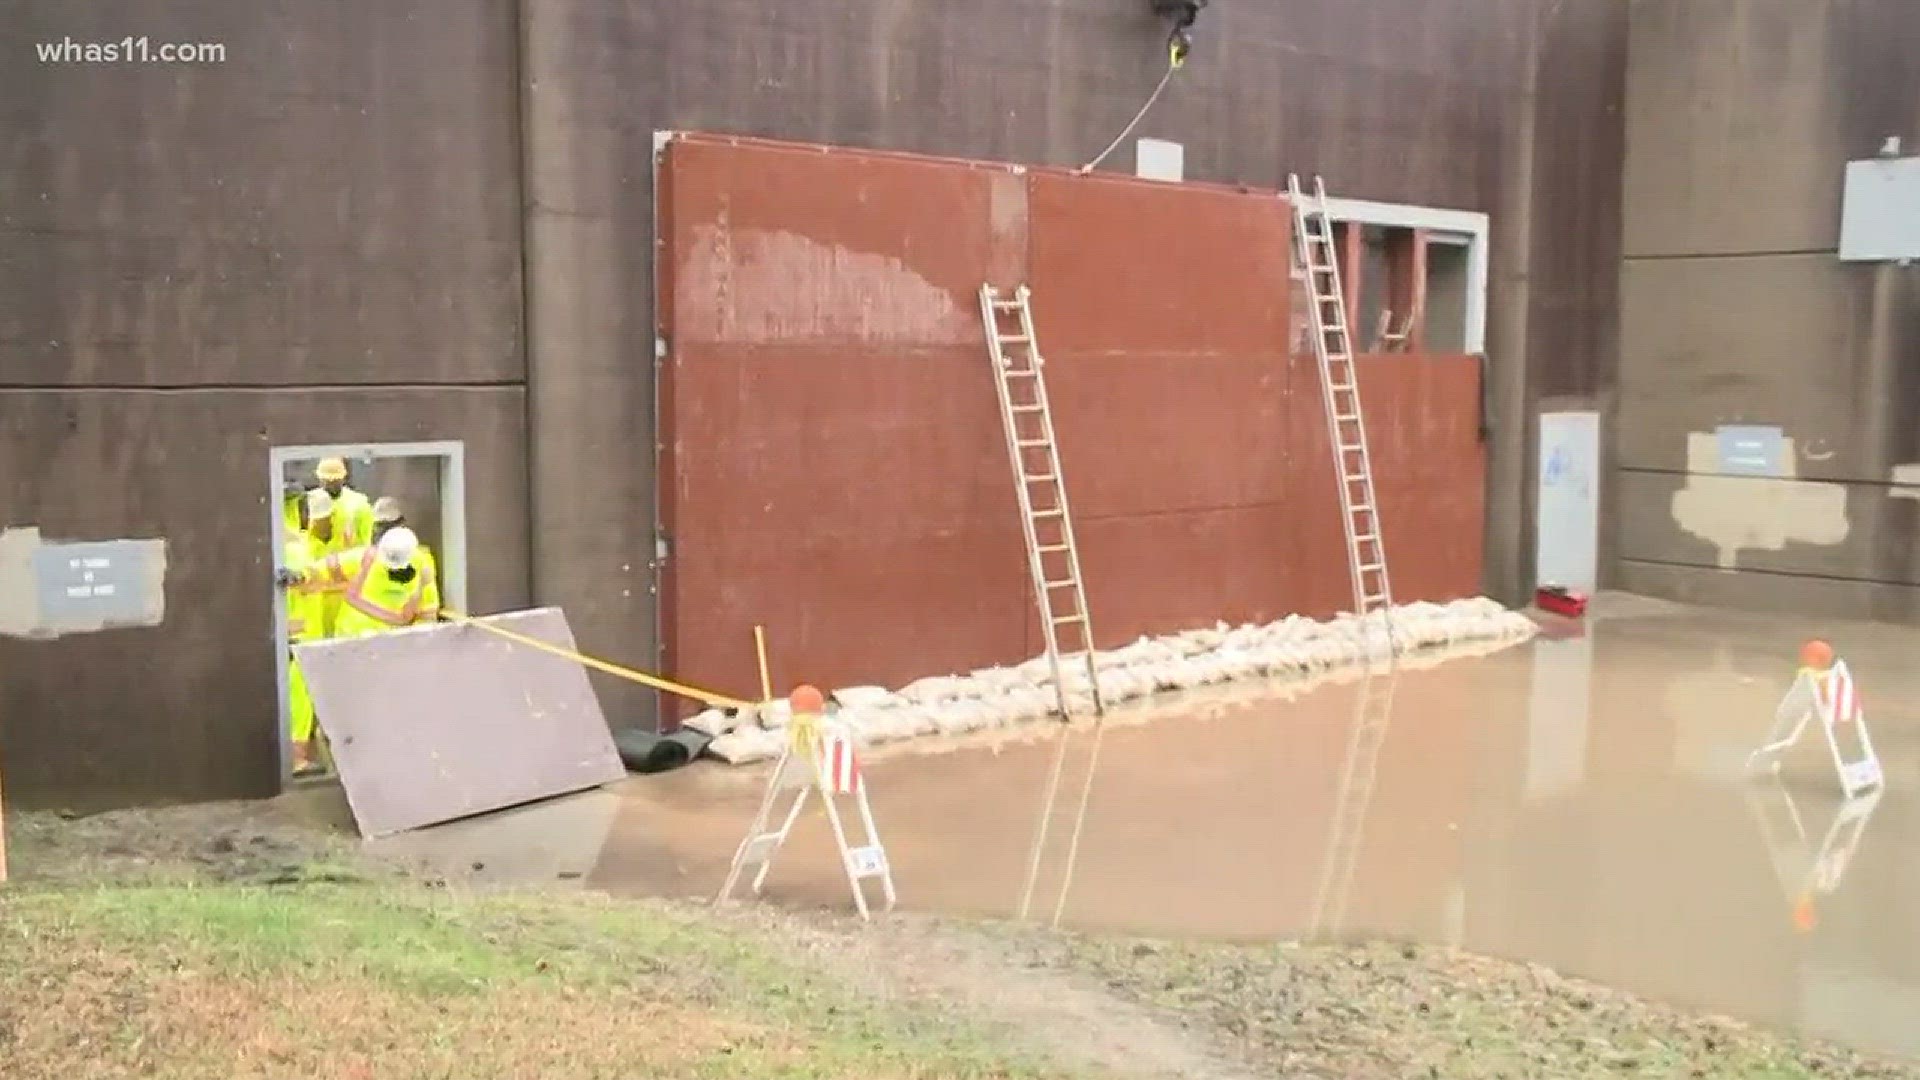 The flood walls are going up along Louisville's riverfront, in an effort to keep the rising water out of the city.